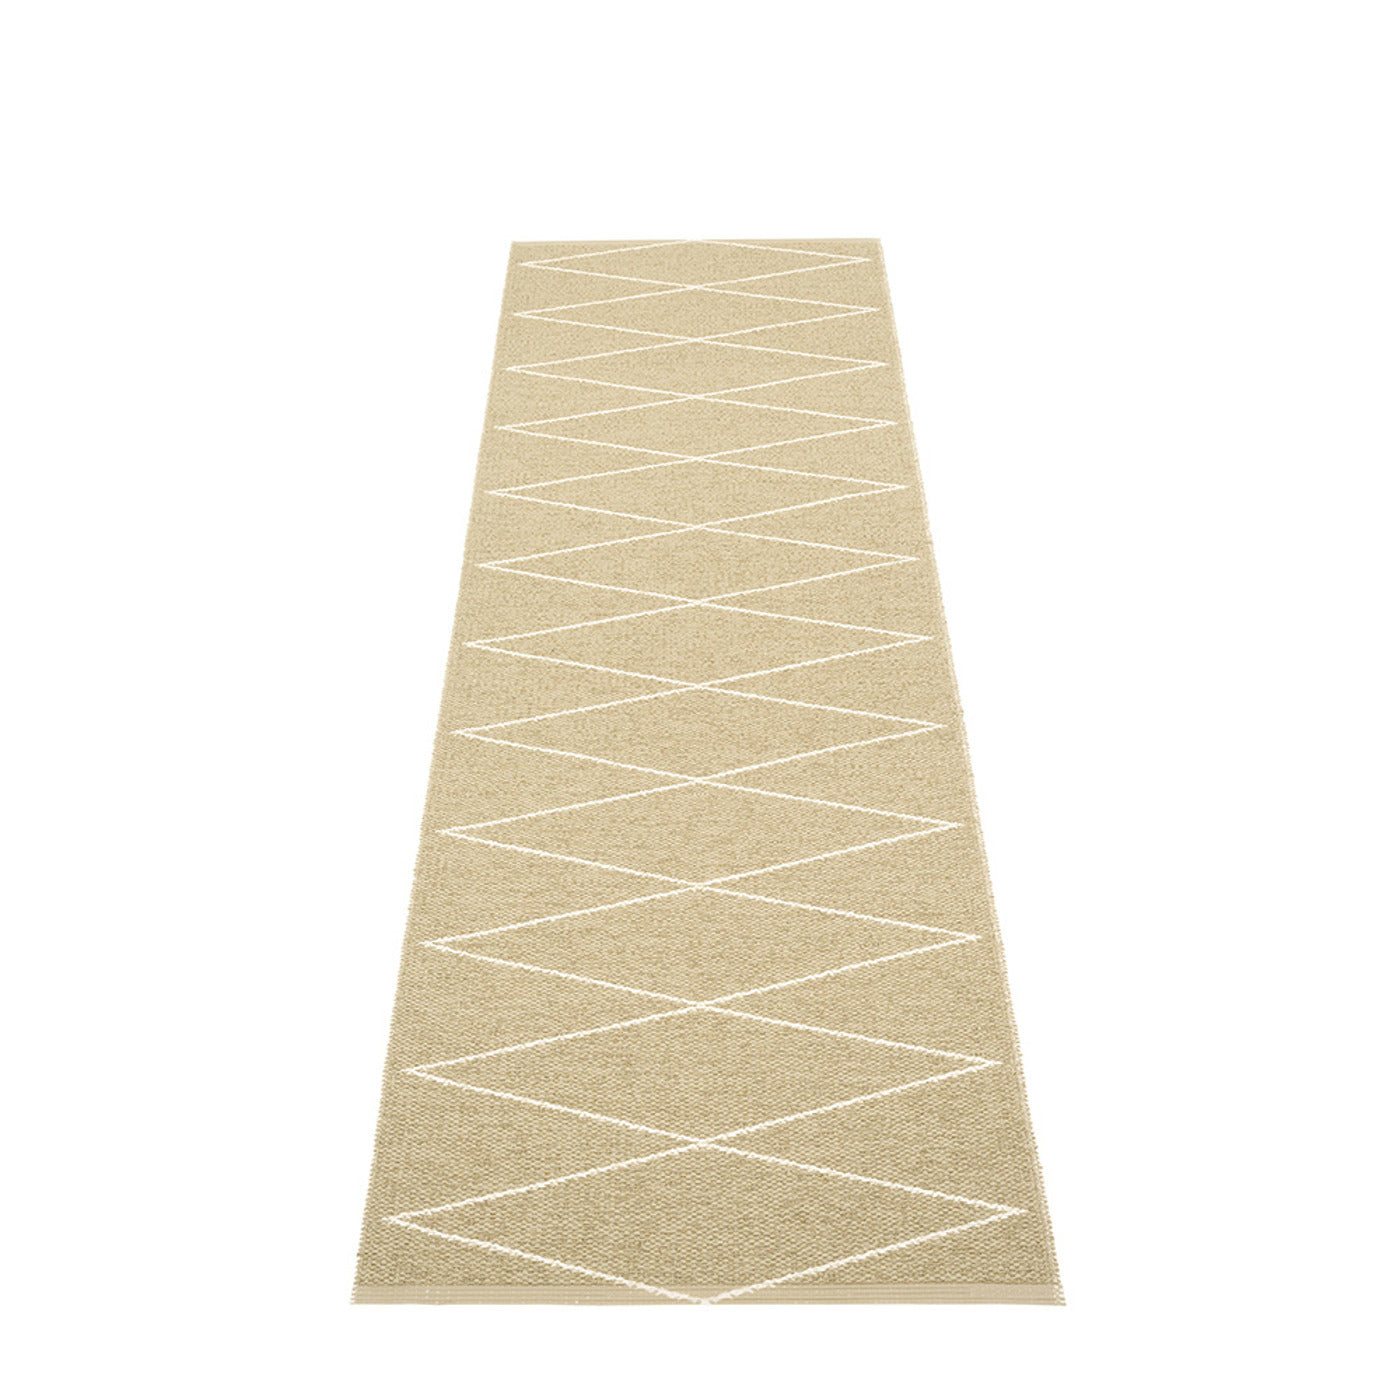 All sizes MAX RUG - Sand